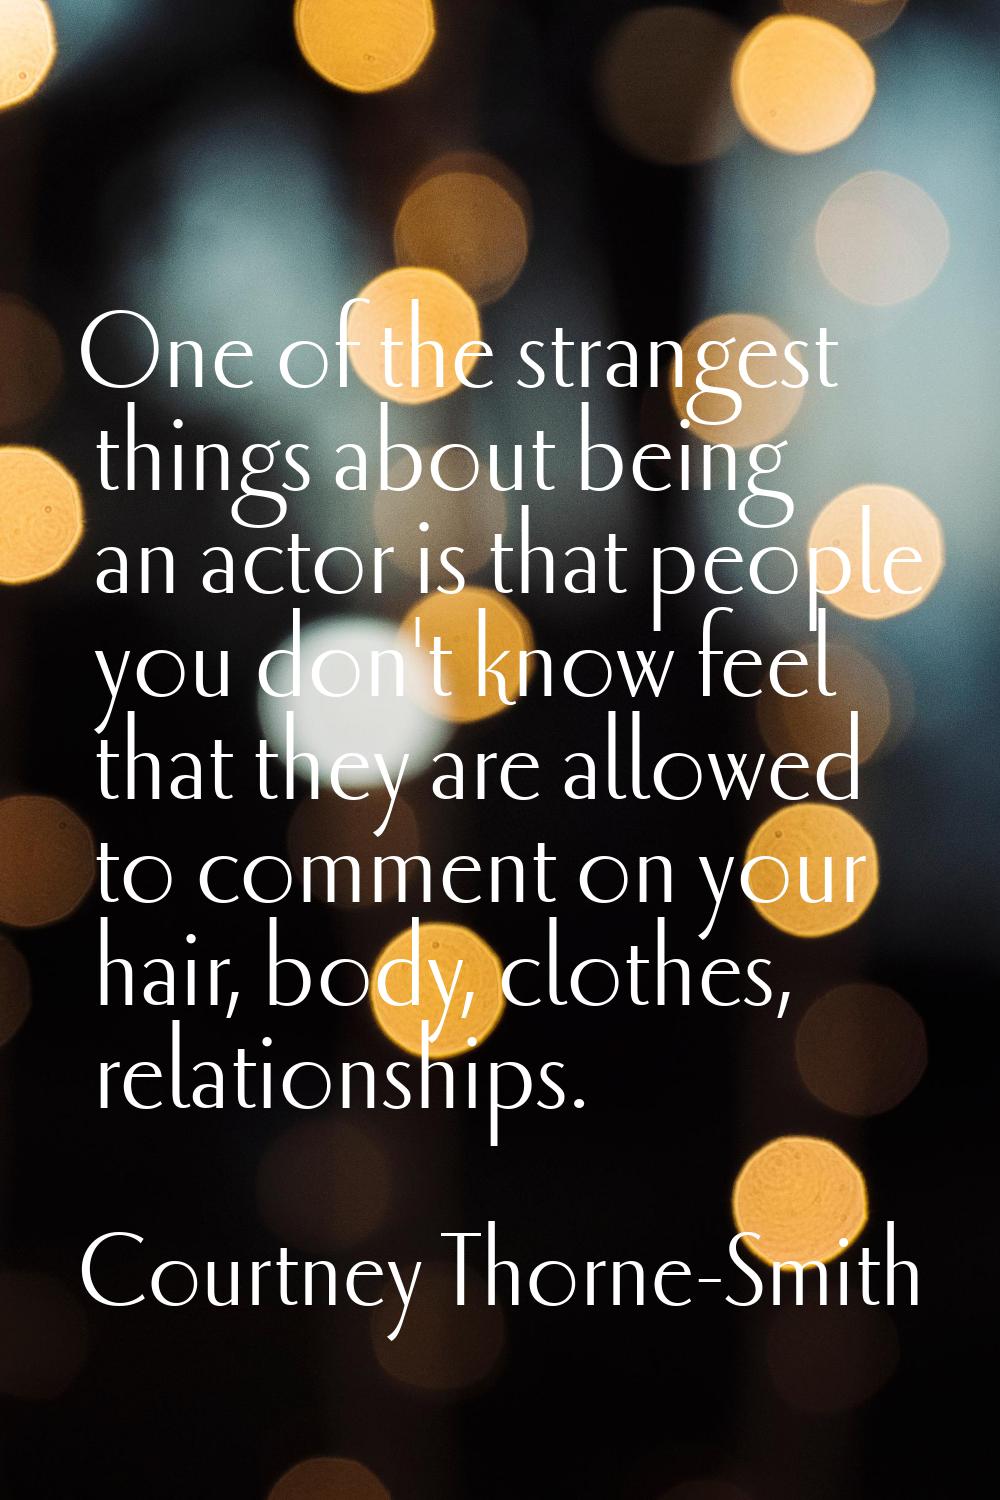 One of the strangest things about being an actor is that people you don't know feel that they are a